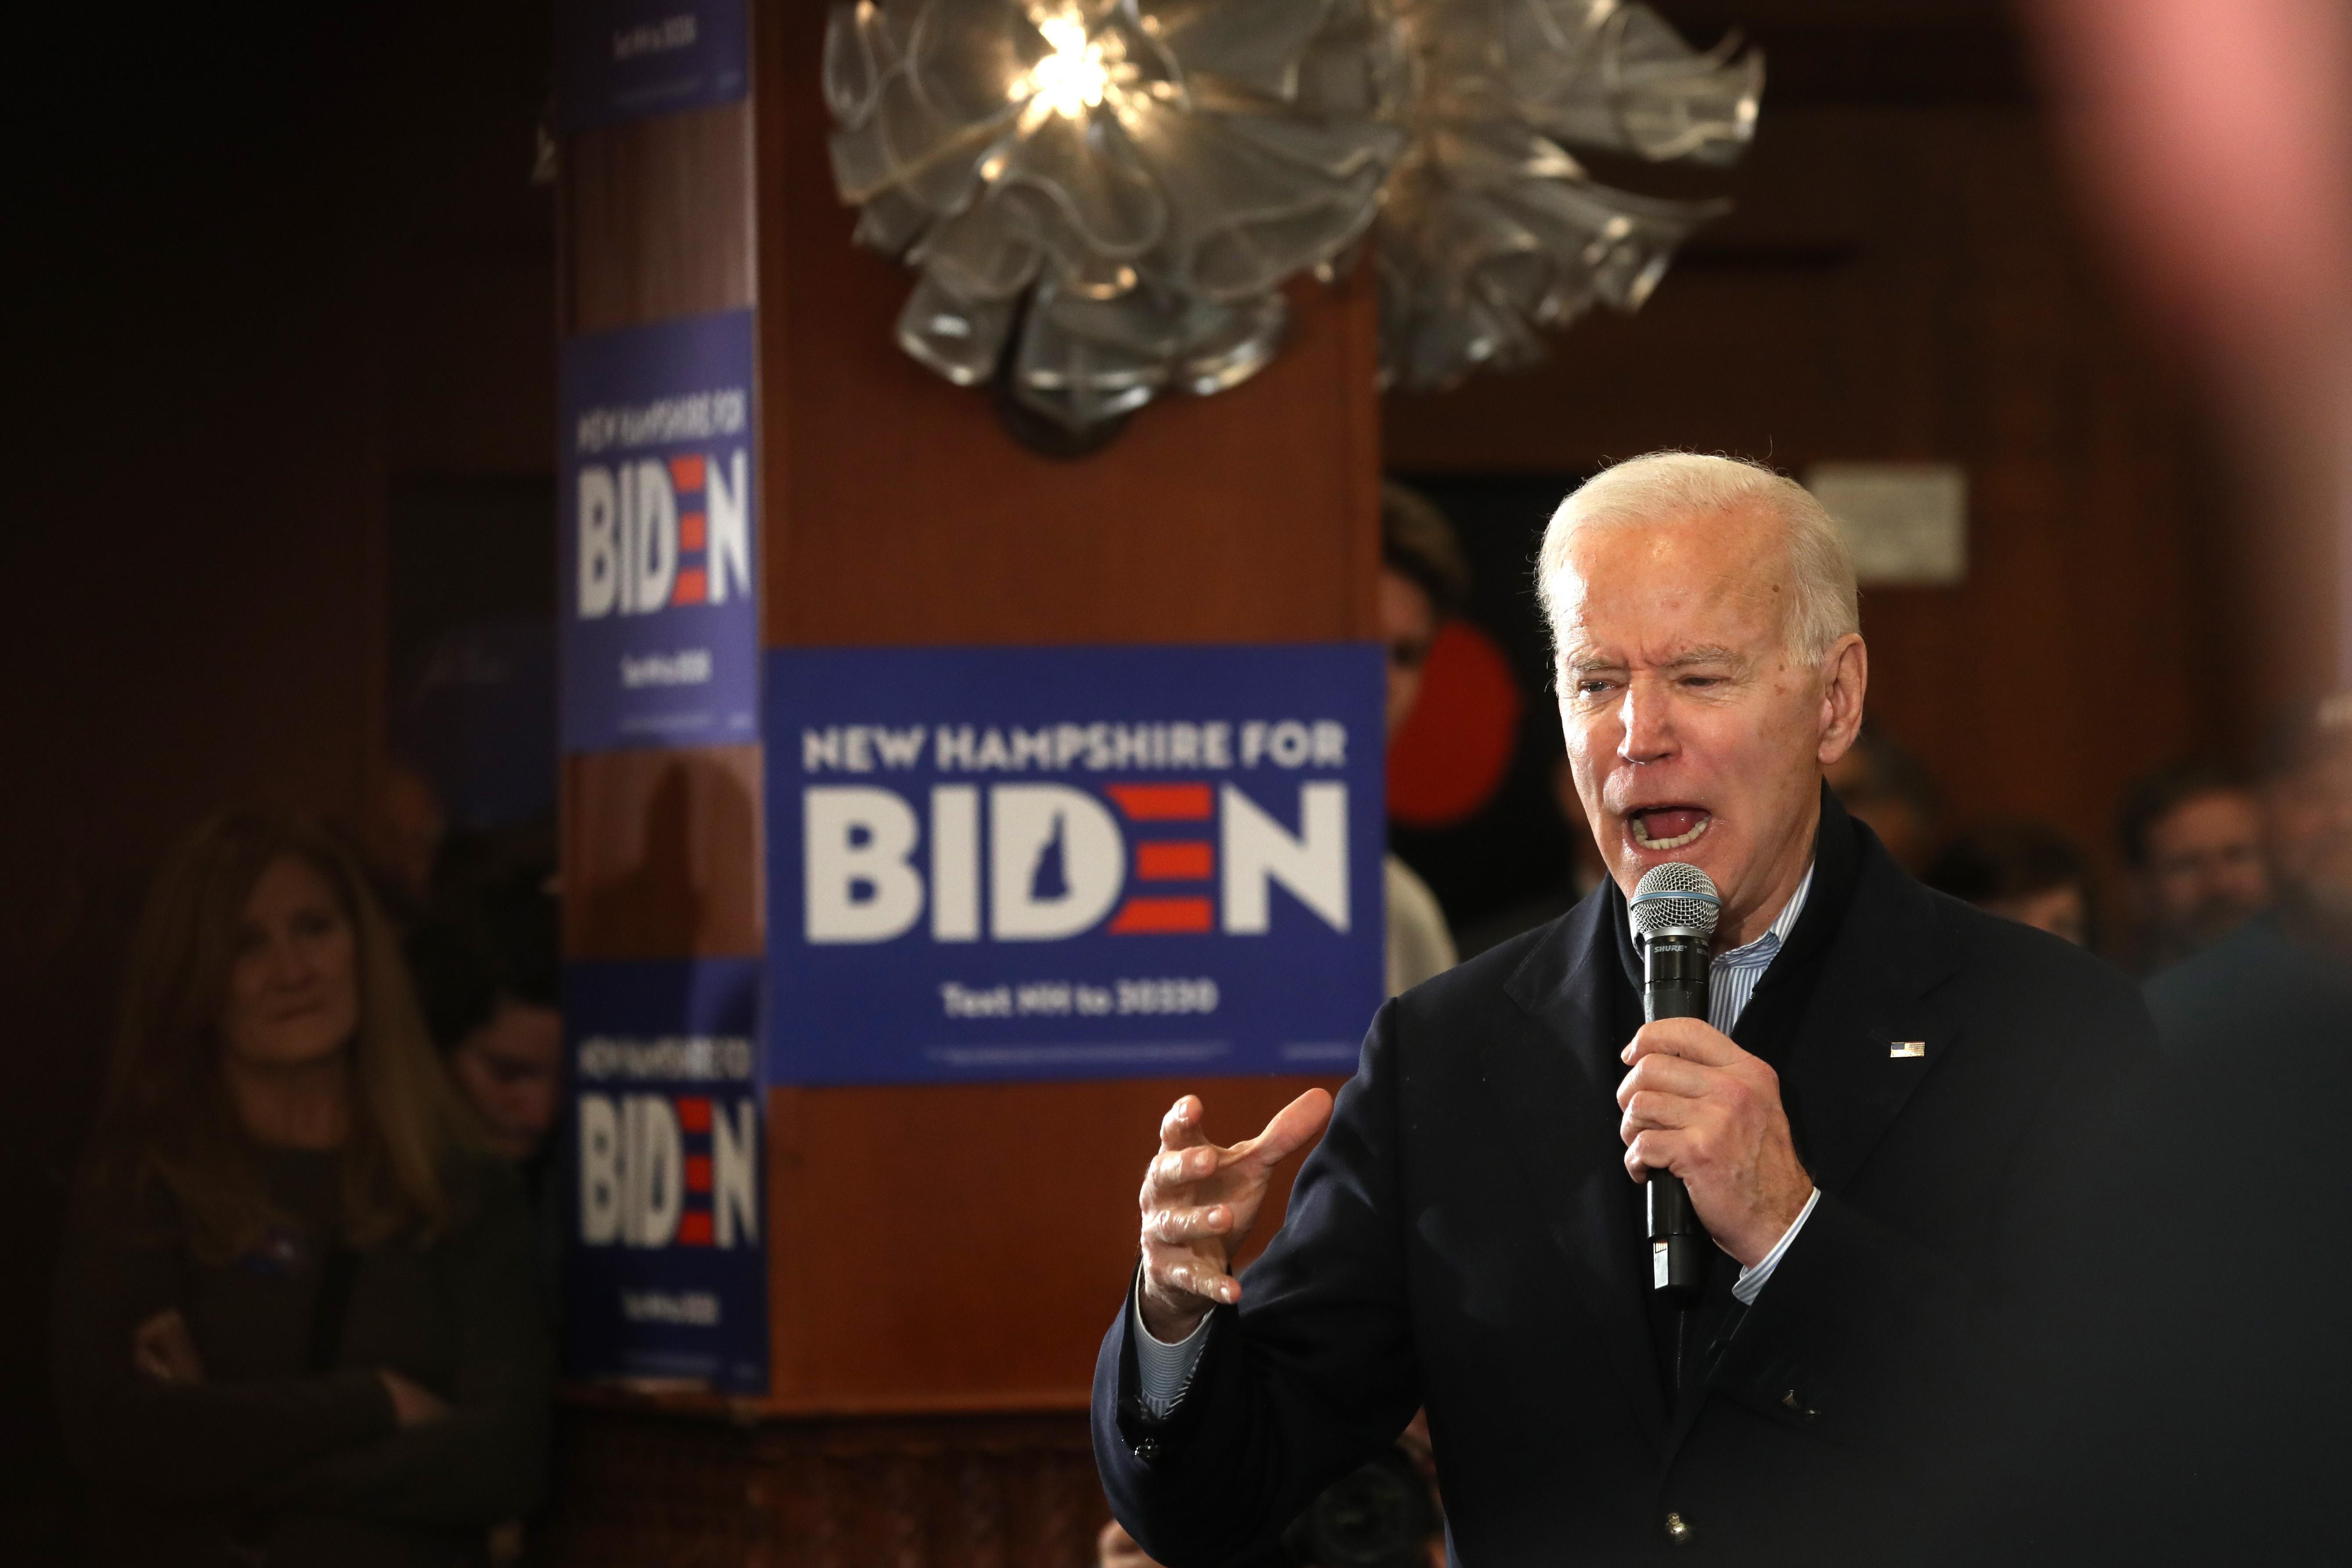 Joe Biden holding a microphone, mid-word, in front of a Biden campaign sign.